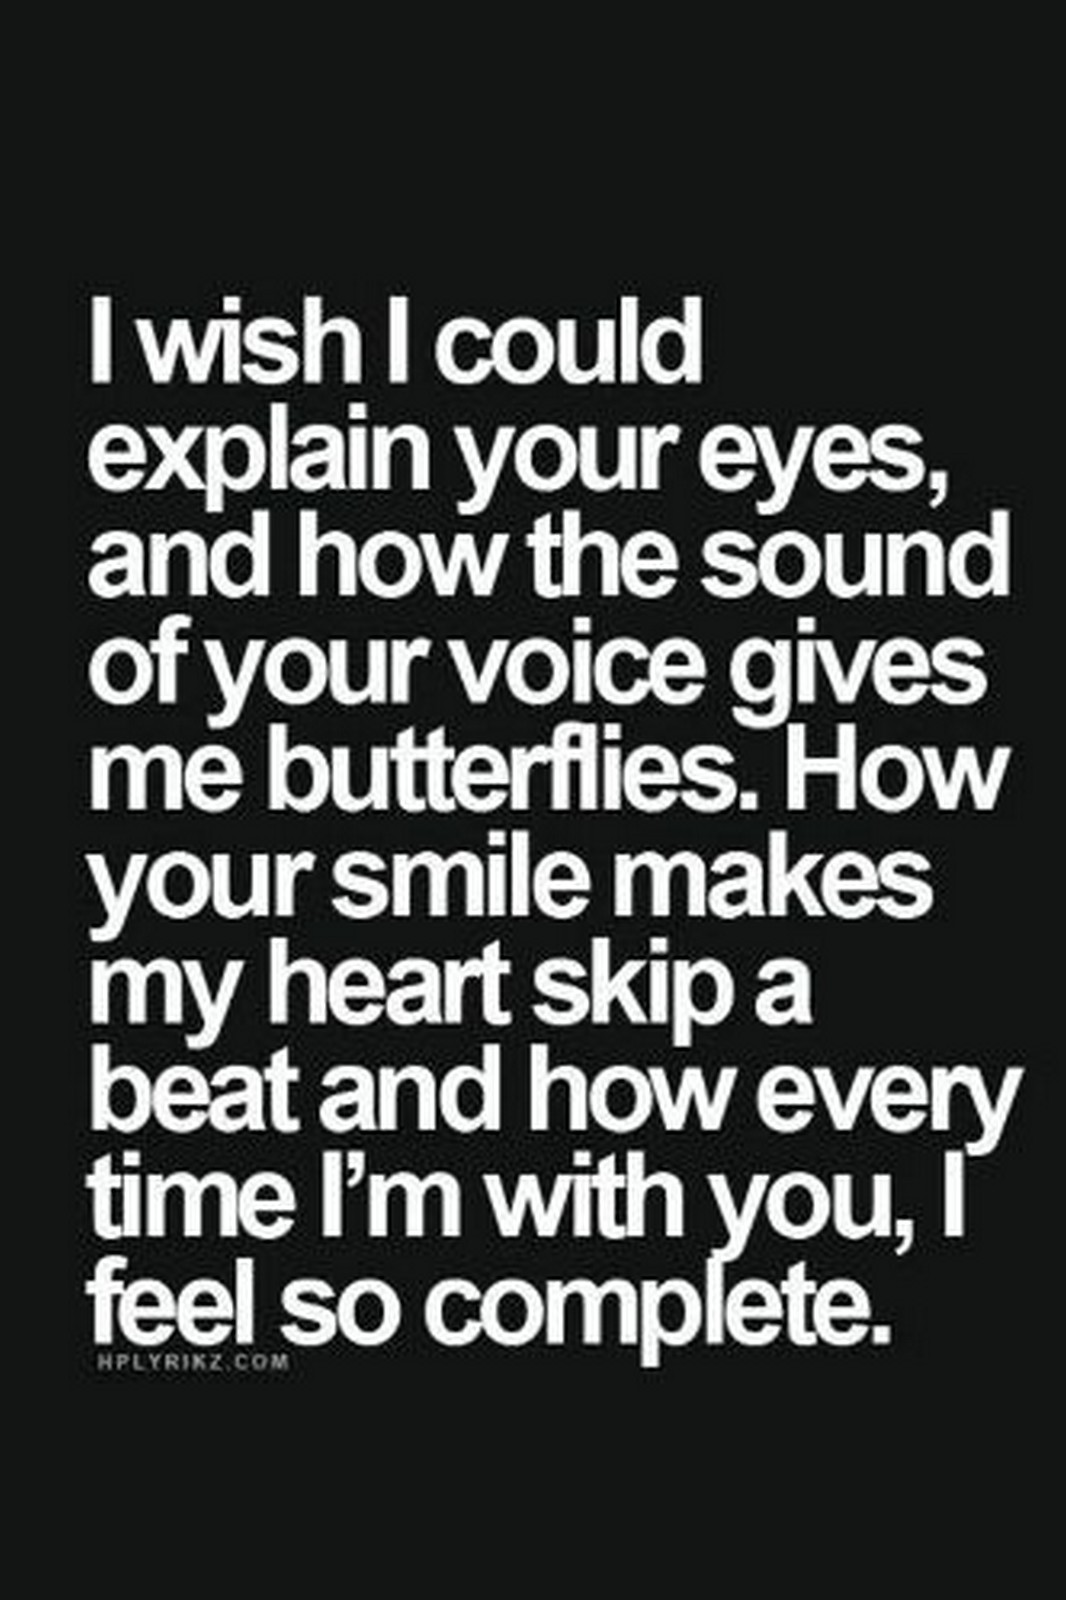 55 Romantic Quotes - "I wish I could explain your eyes, and how the sound of your voice gives me butterflies. How your smile makes my heart skip a beat and how every time I'm with you, I feel so complete."